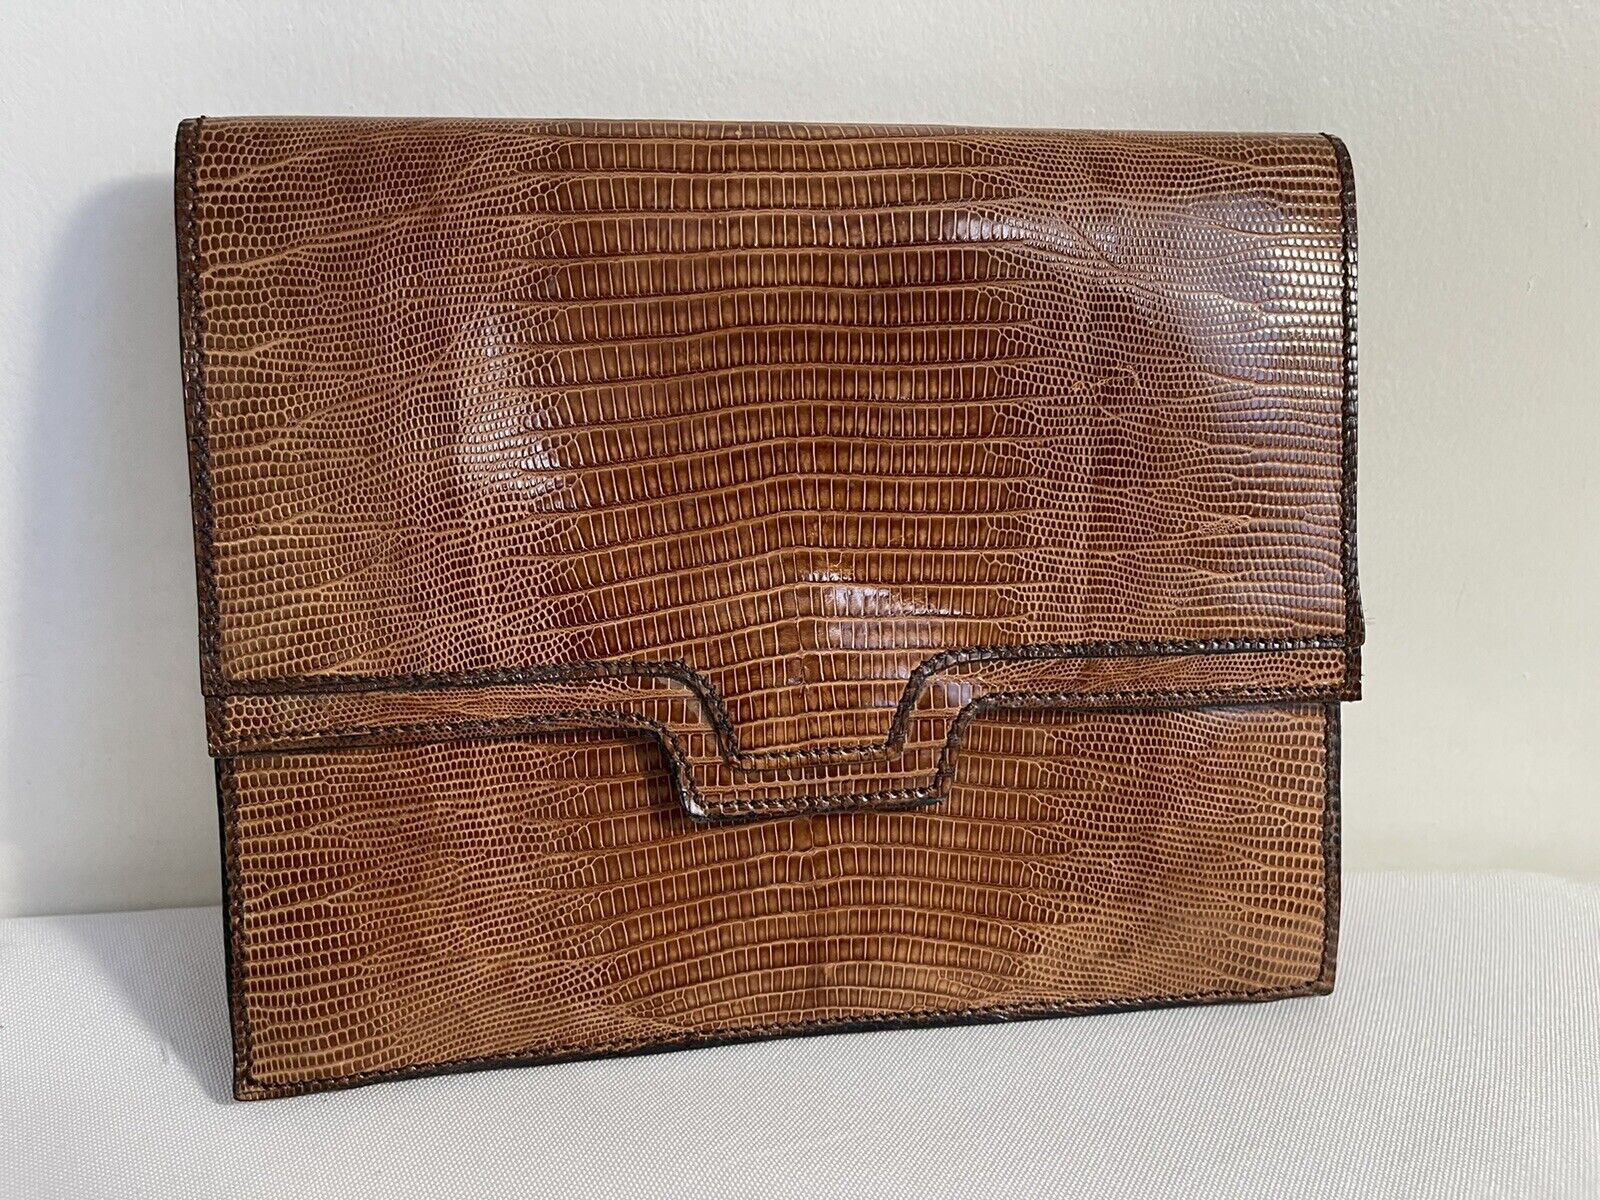 Vintage Industria Argentina Leather Woman’s Clutch GREAT CONDITION